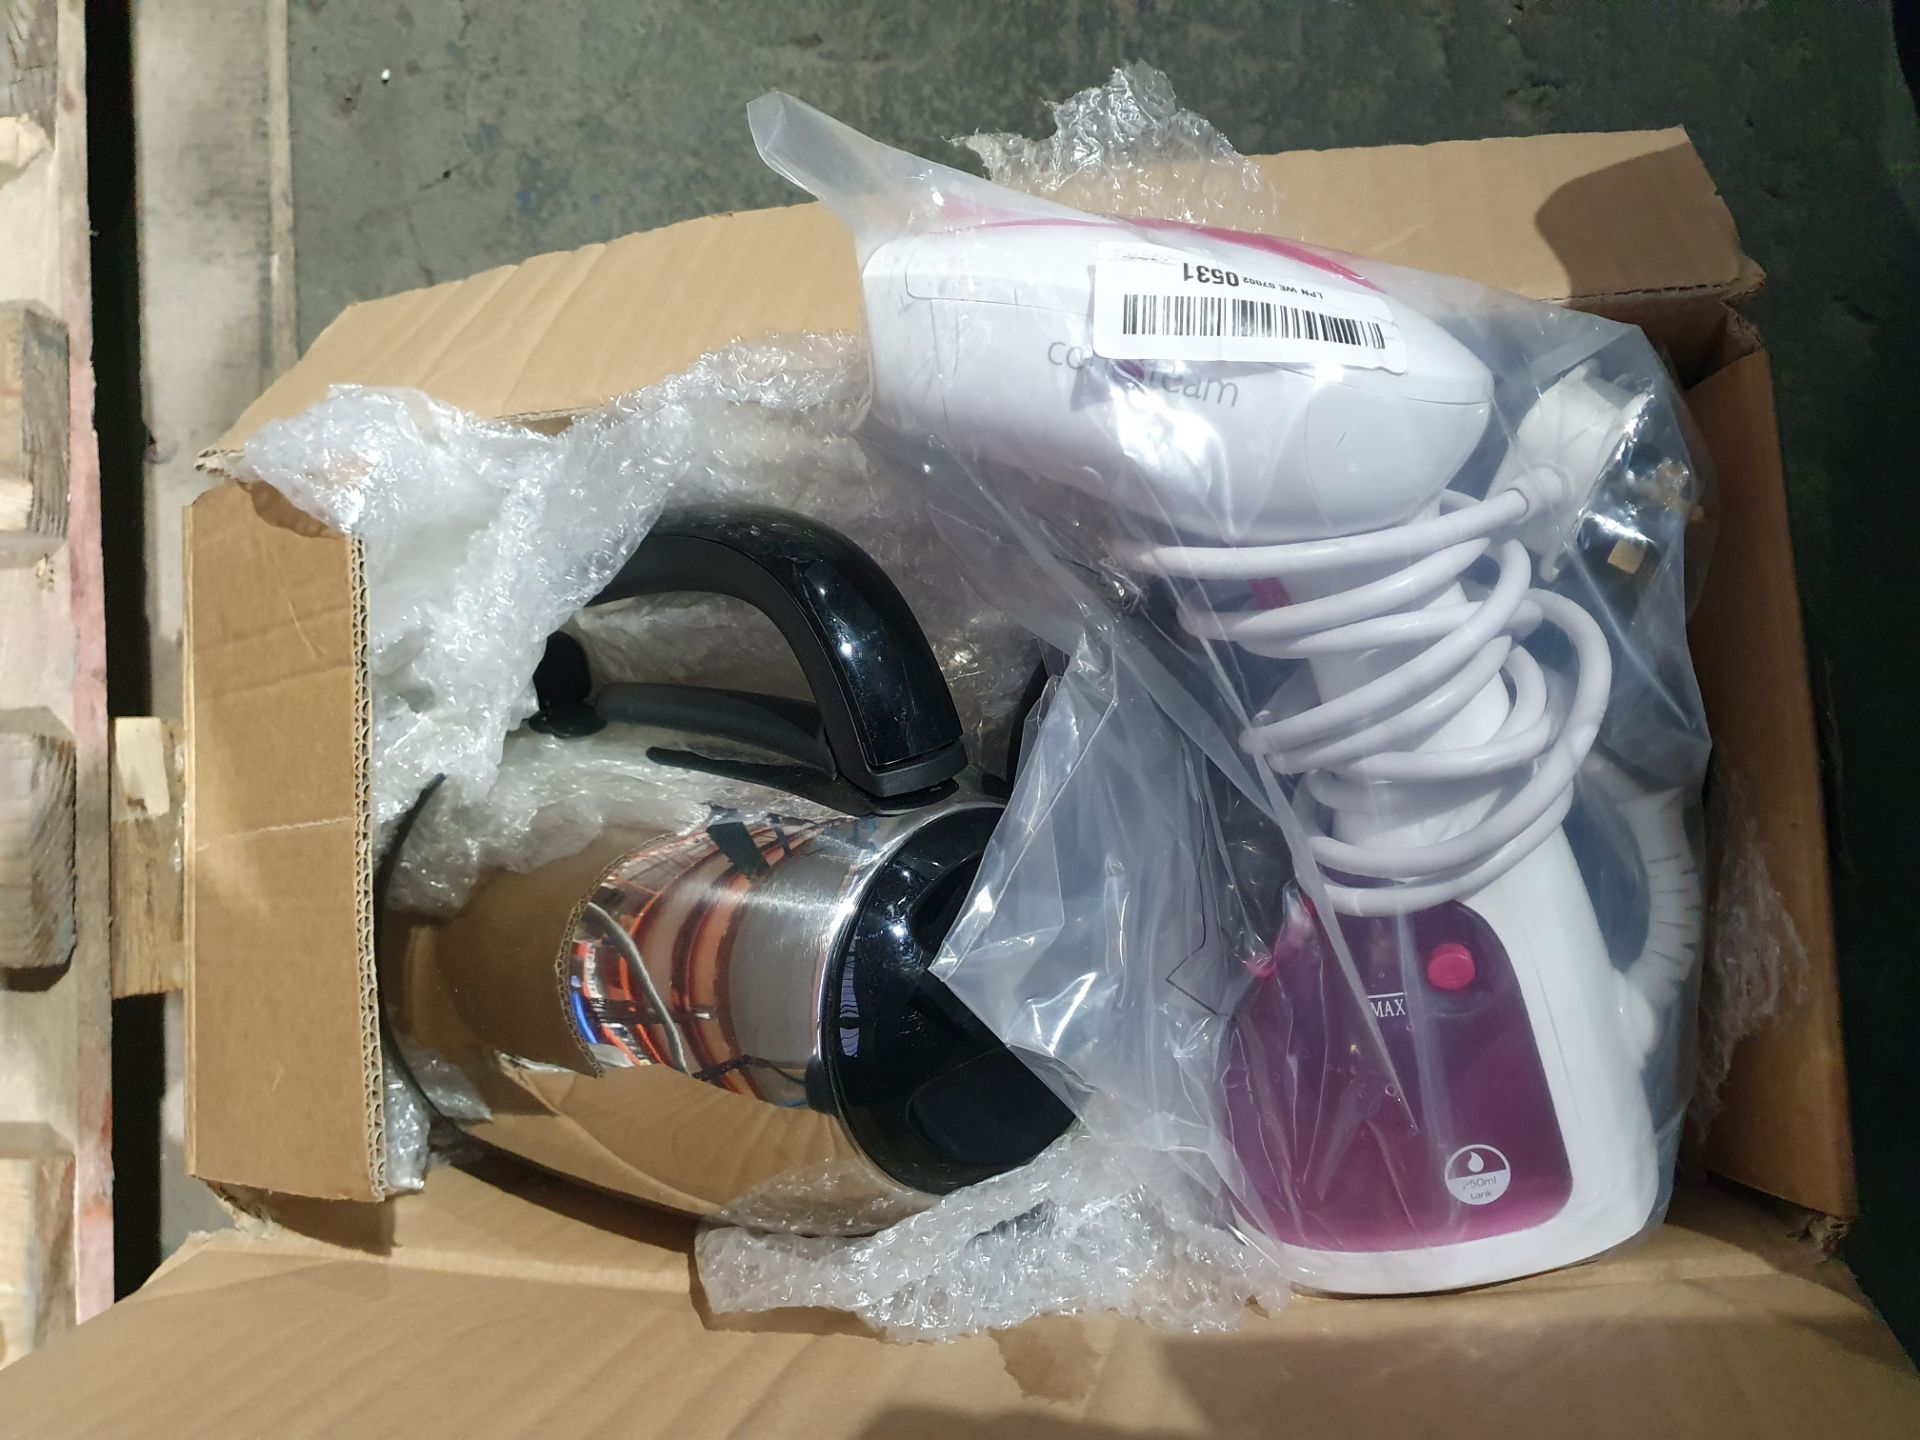 X 2 ITEMS TO INCLUDE KETTLE, CLOTHES STEAMERS Condition ReportAppraisal Available on Request - All